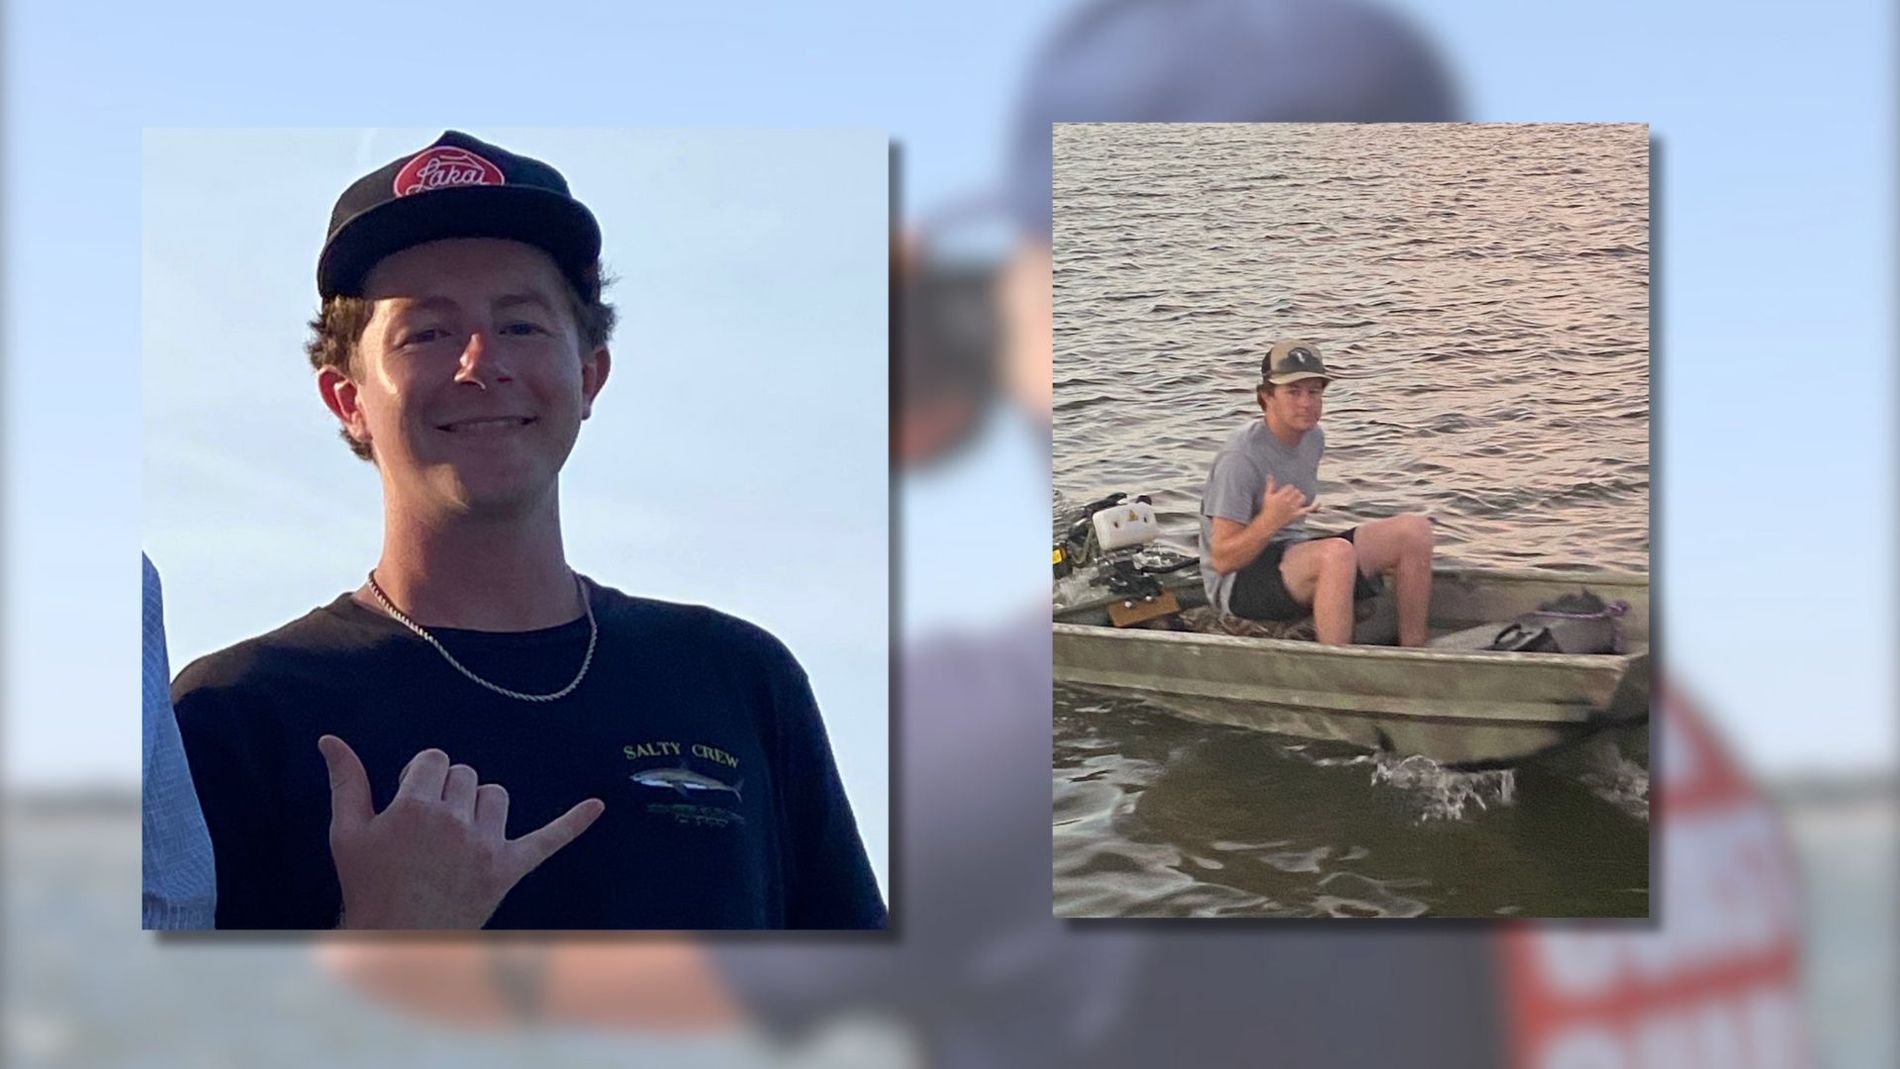 United States Coast Guard search for missing 25-year-old man